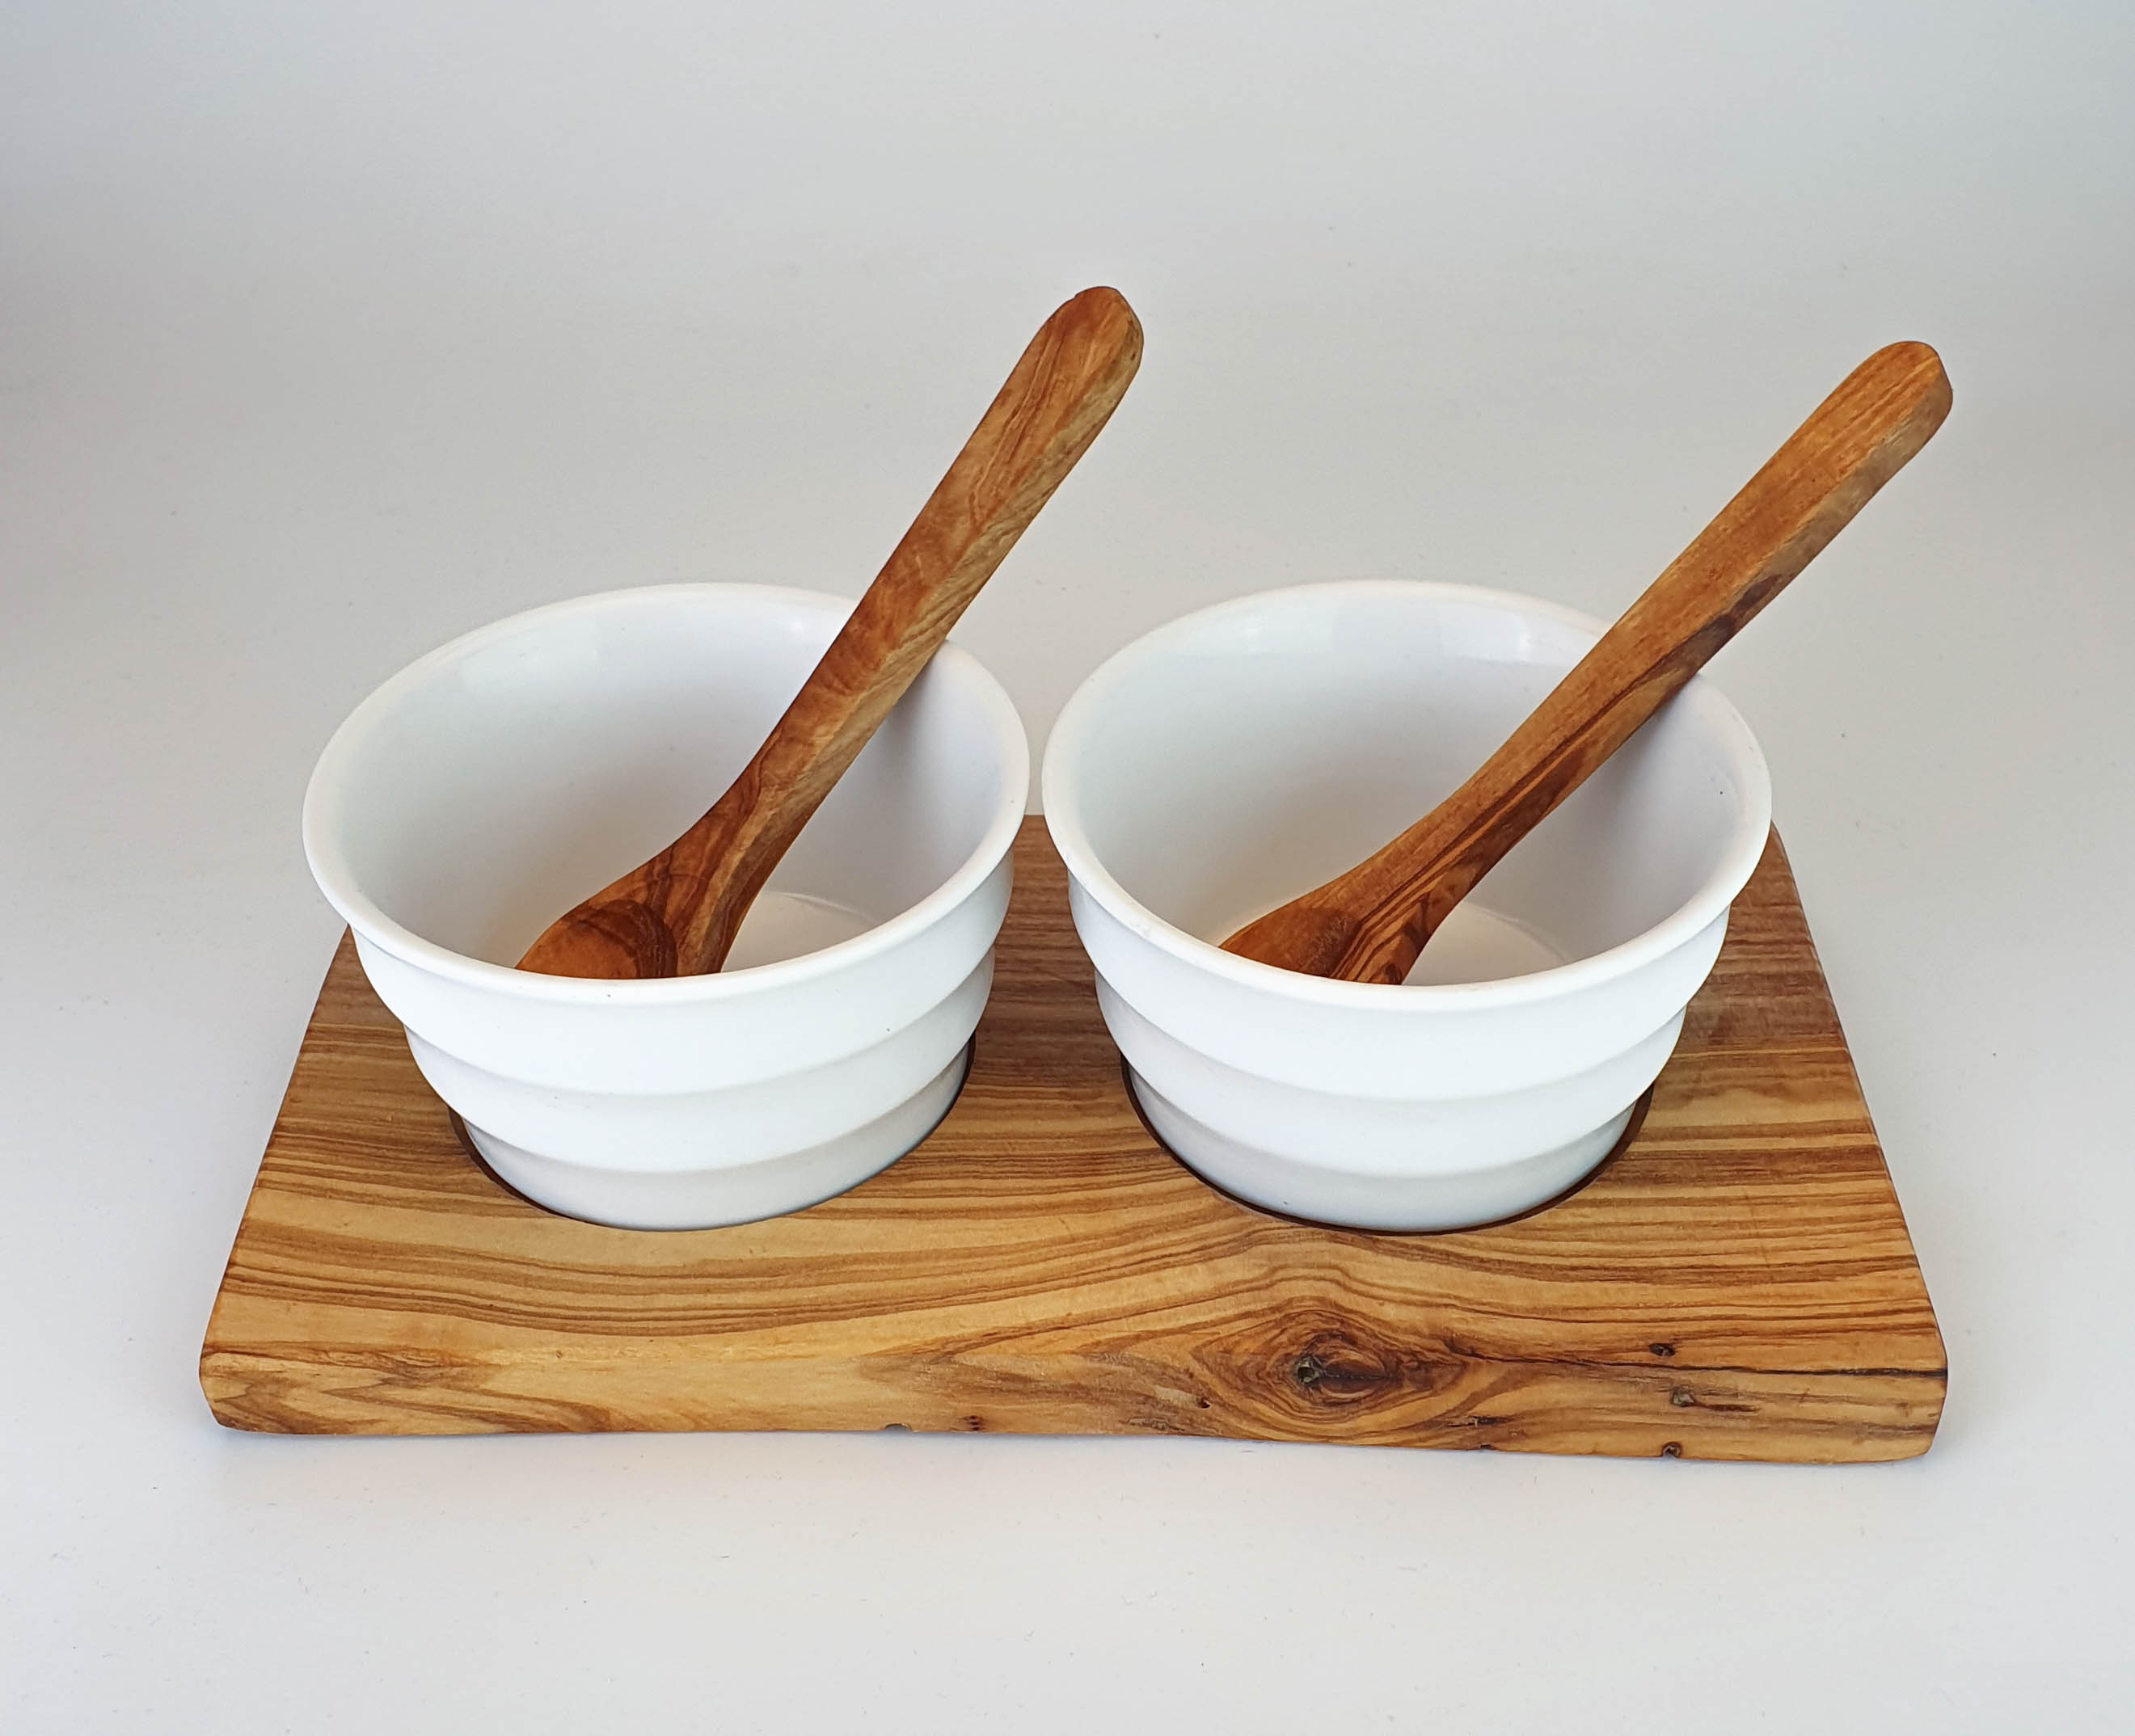 2-piece dip set 2022 with olive wood and large porcelain bowls.